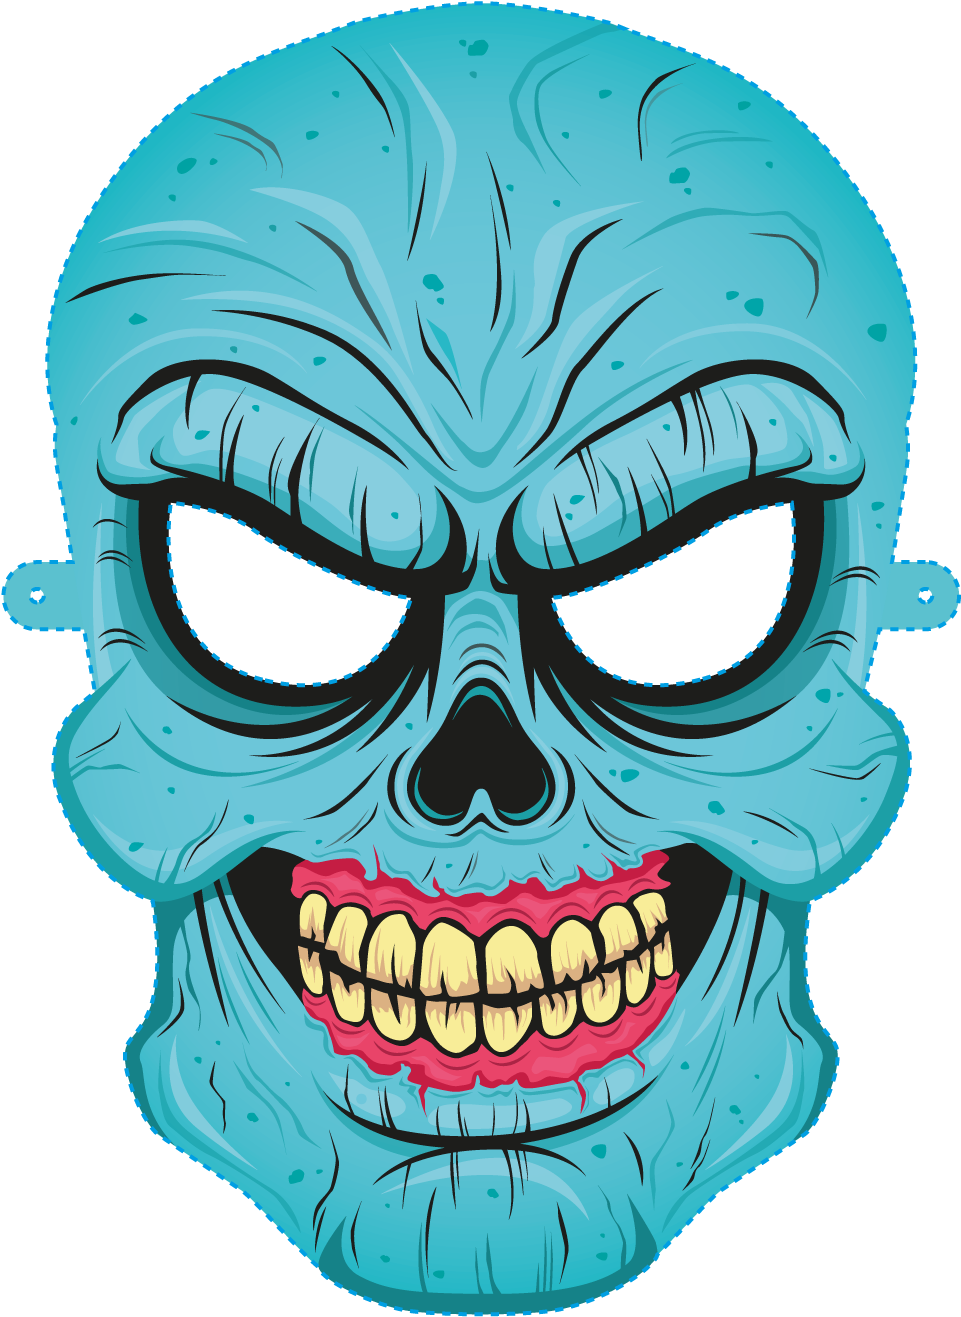 Halloween Costume Mask Euclidean Vector Zombie - Ask Me About Halloween Costume Evil Blue Head T-shirt (1200x1698)